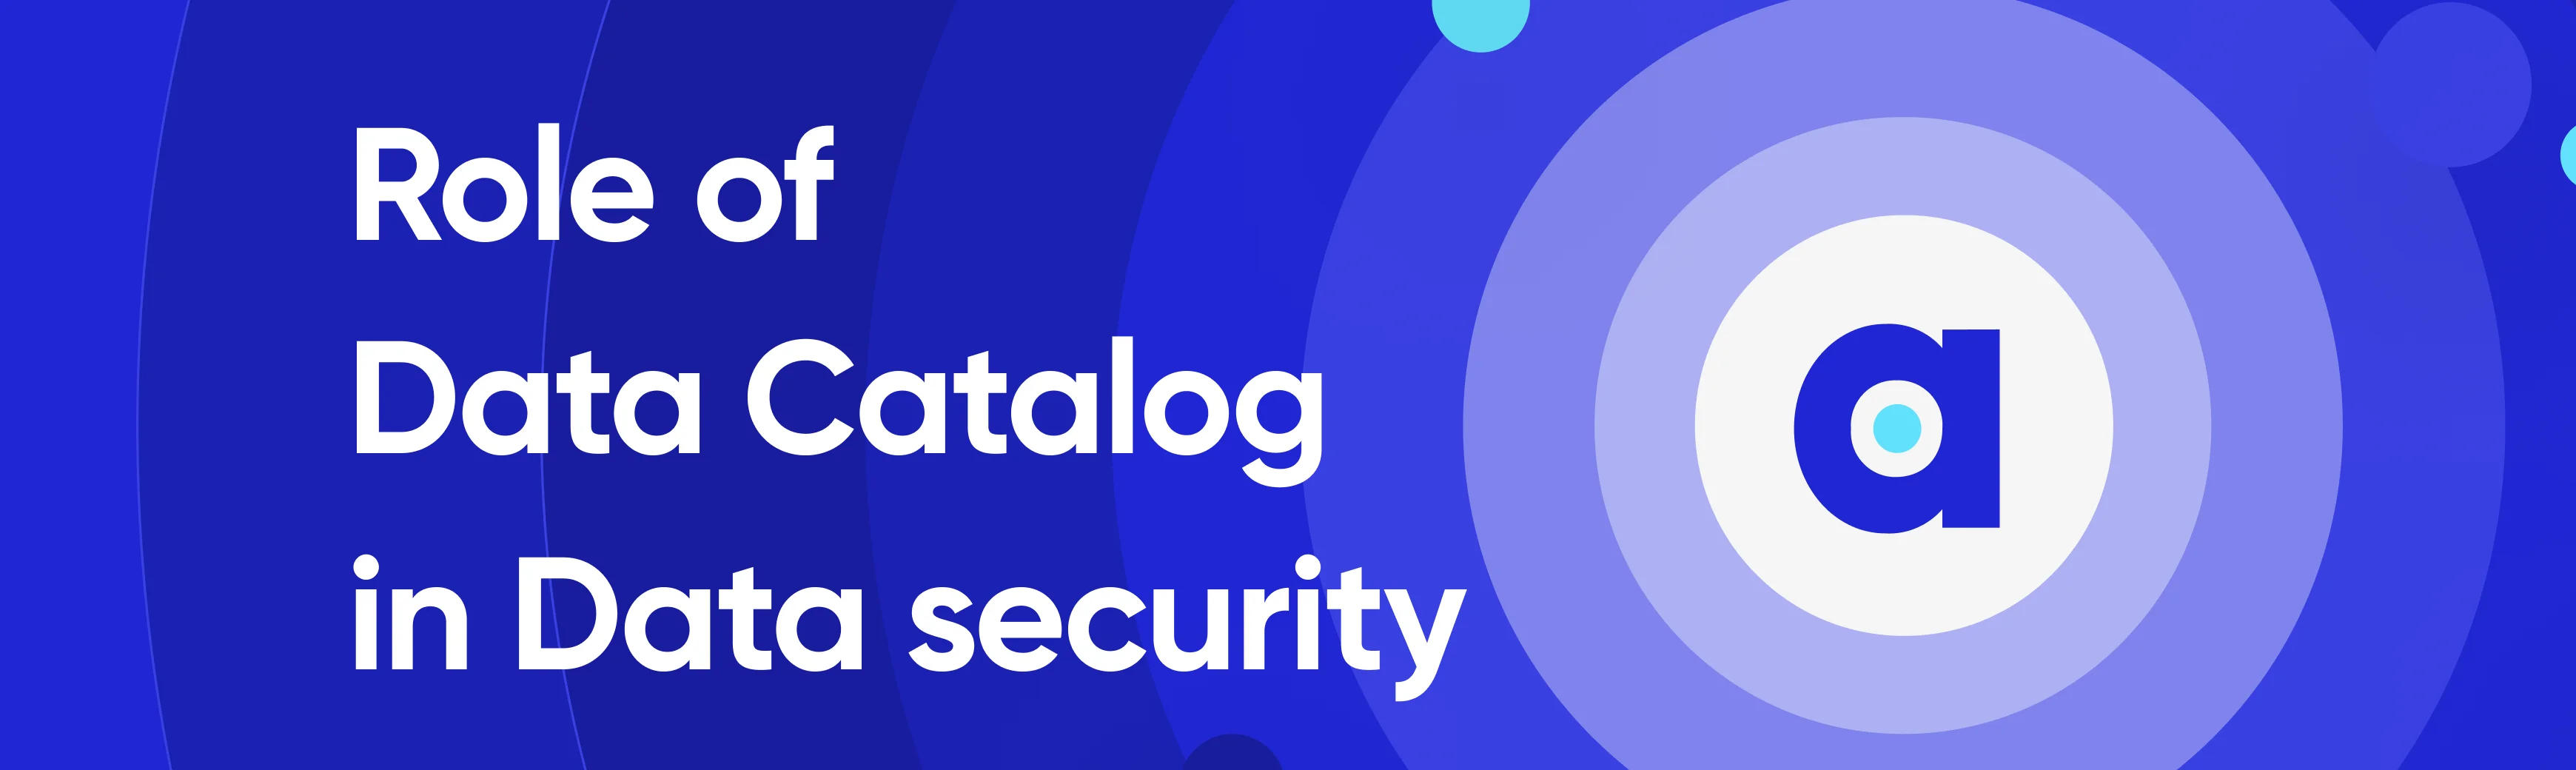 Role of data catalog in data security, data catalog security 